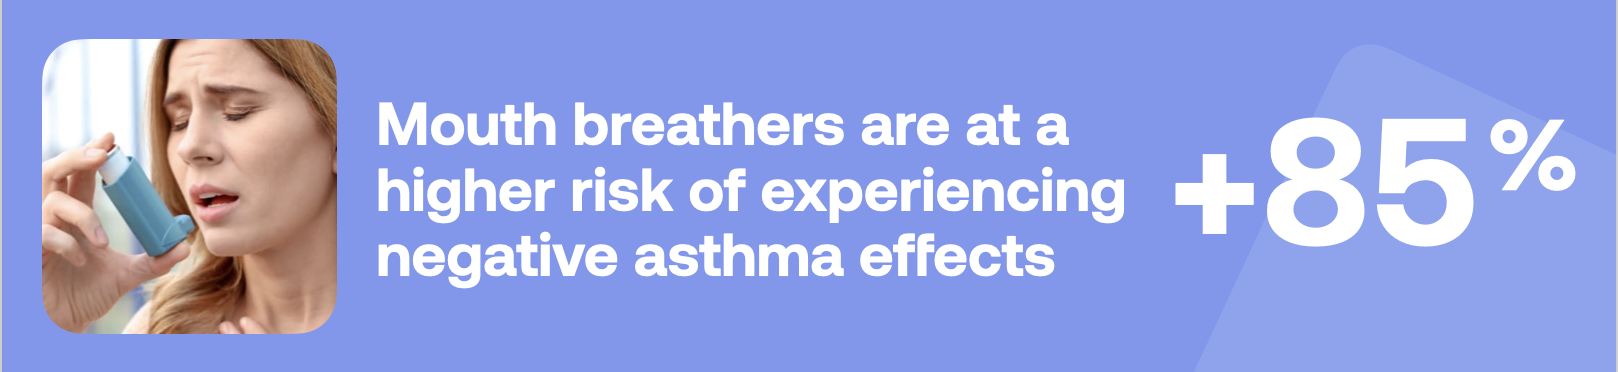 Mouth breathers are at a higher risk of experiencing negative asthma effects +85%